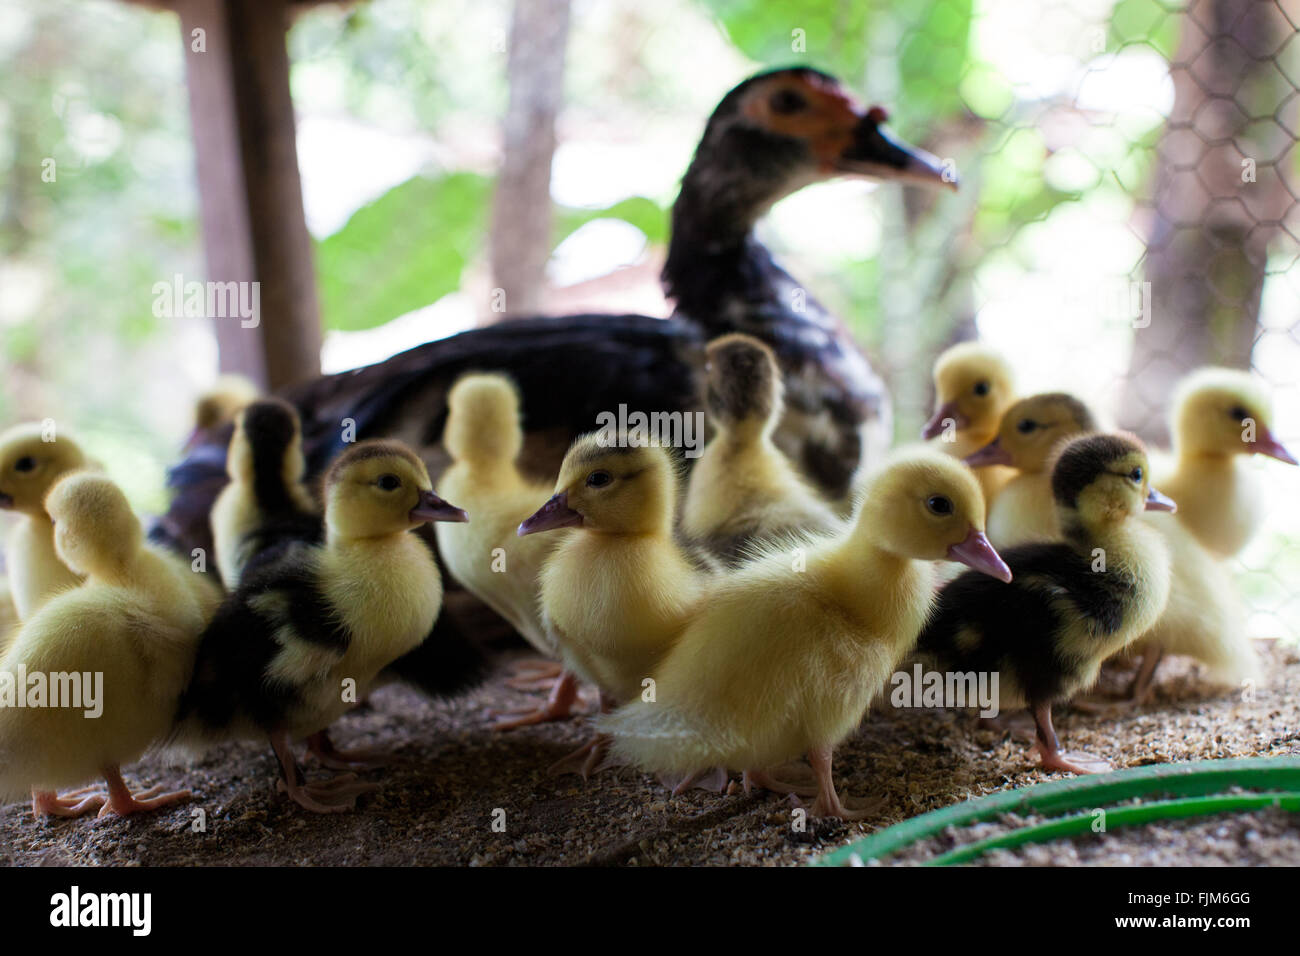 A mother duck with her ducklings poultry farm Tanzania Stock Photo